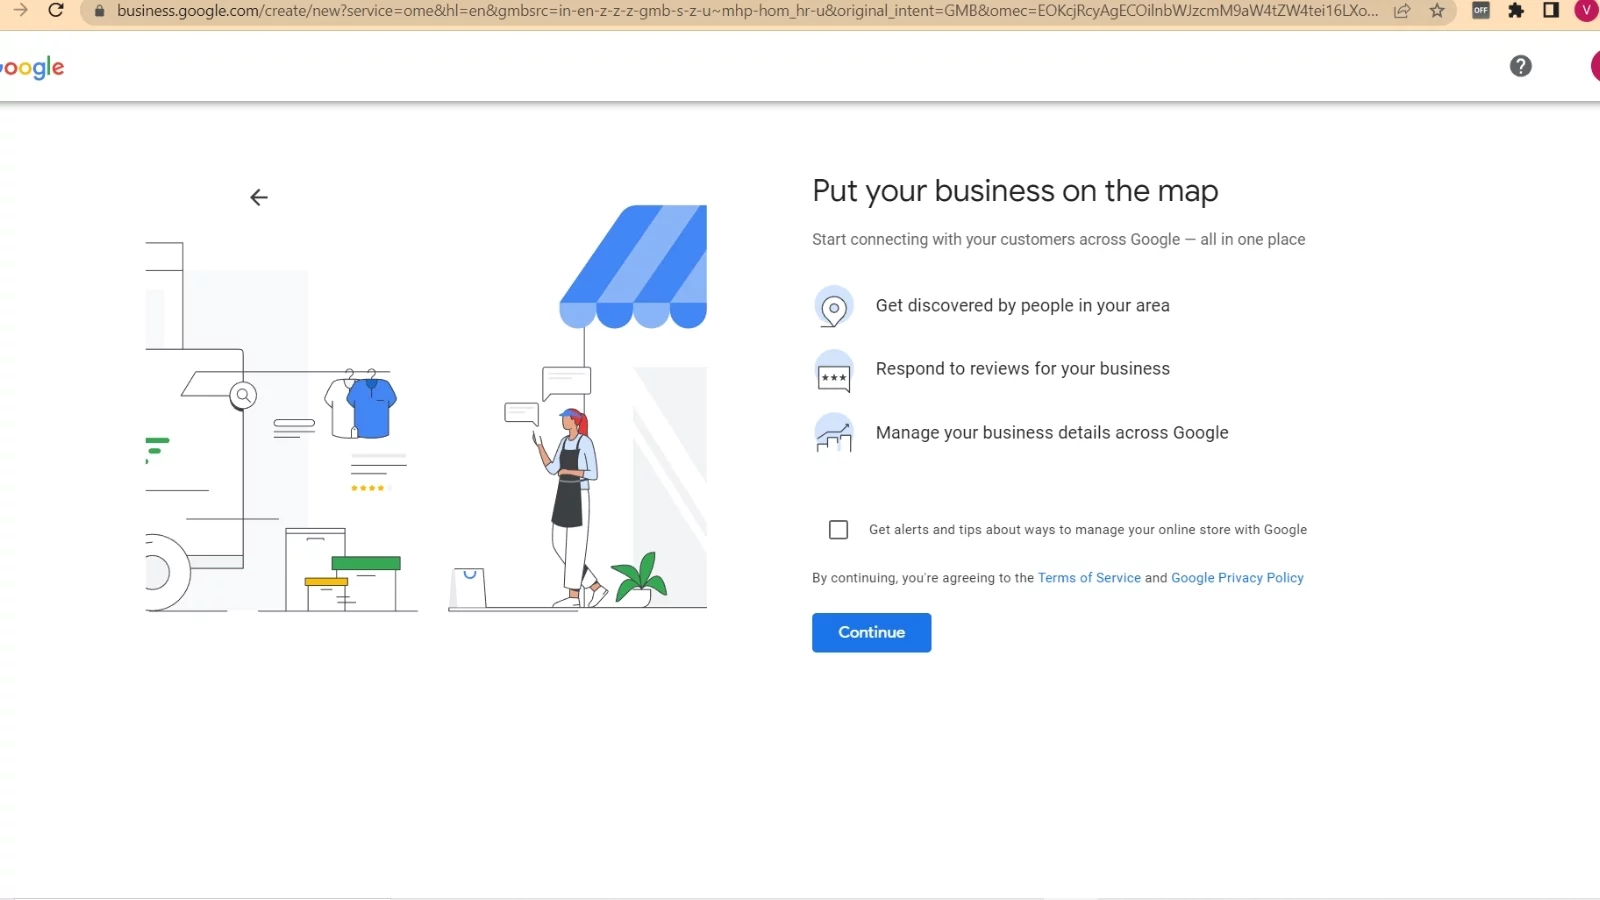 You can put your business on map to perform local SEO.